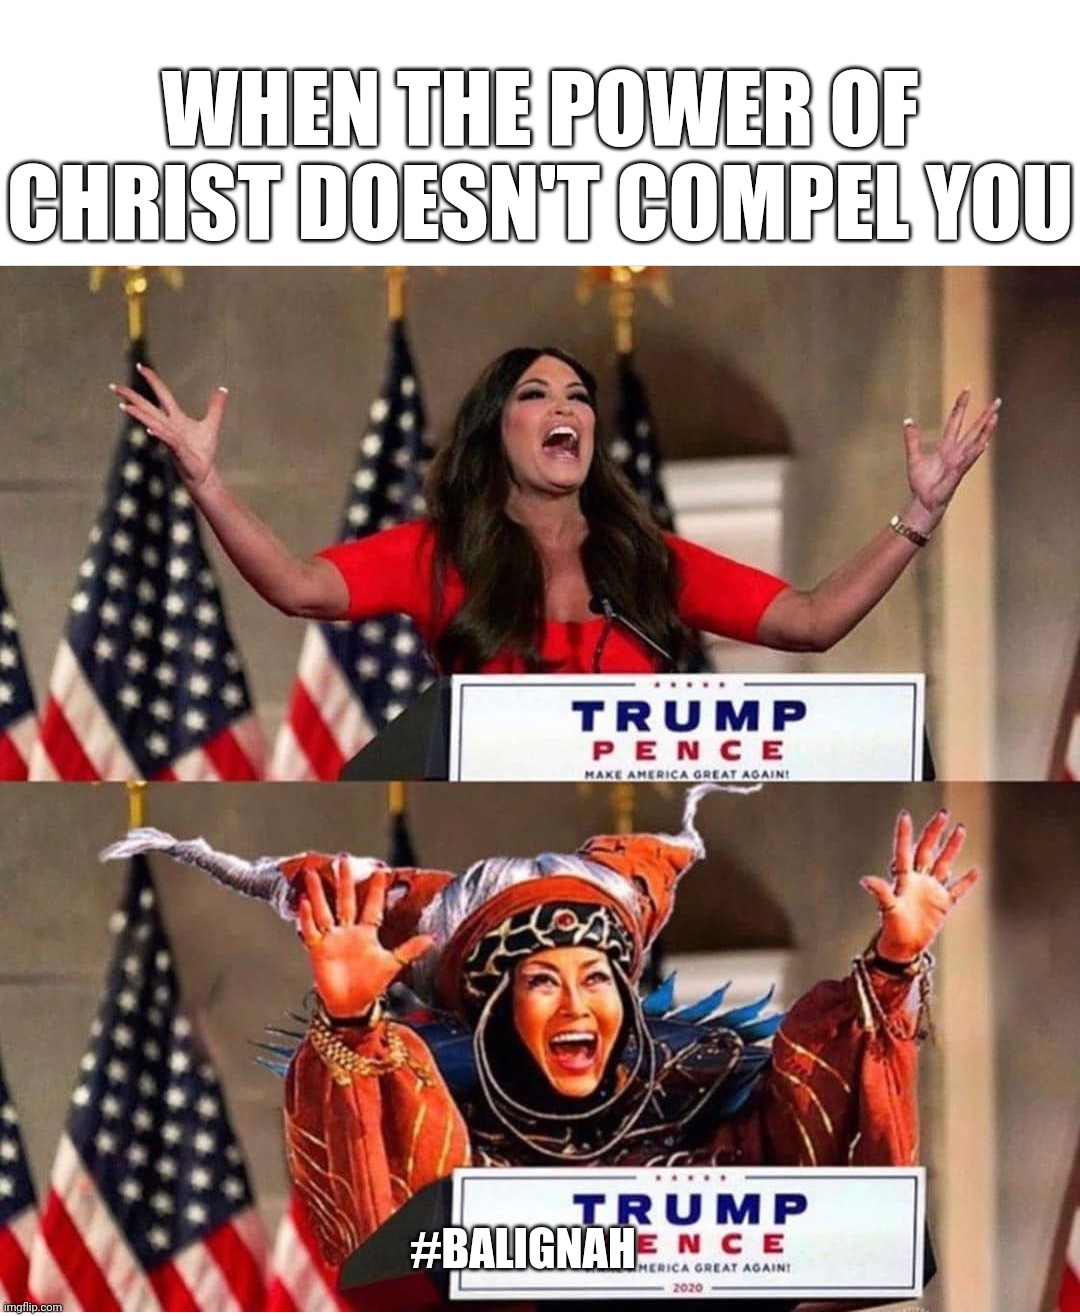 Help me jeebus |  WHEN THE POWER OF CHRIST DOESN'T COMPEL YOU; #BALIGNAH | image tagged in original meme,trump meme,rnc convention,power rangers,satan,donald trump | made w/ Imgflip meme maker